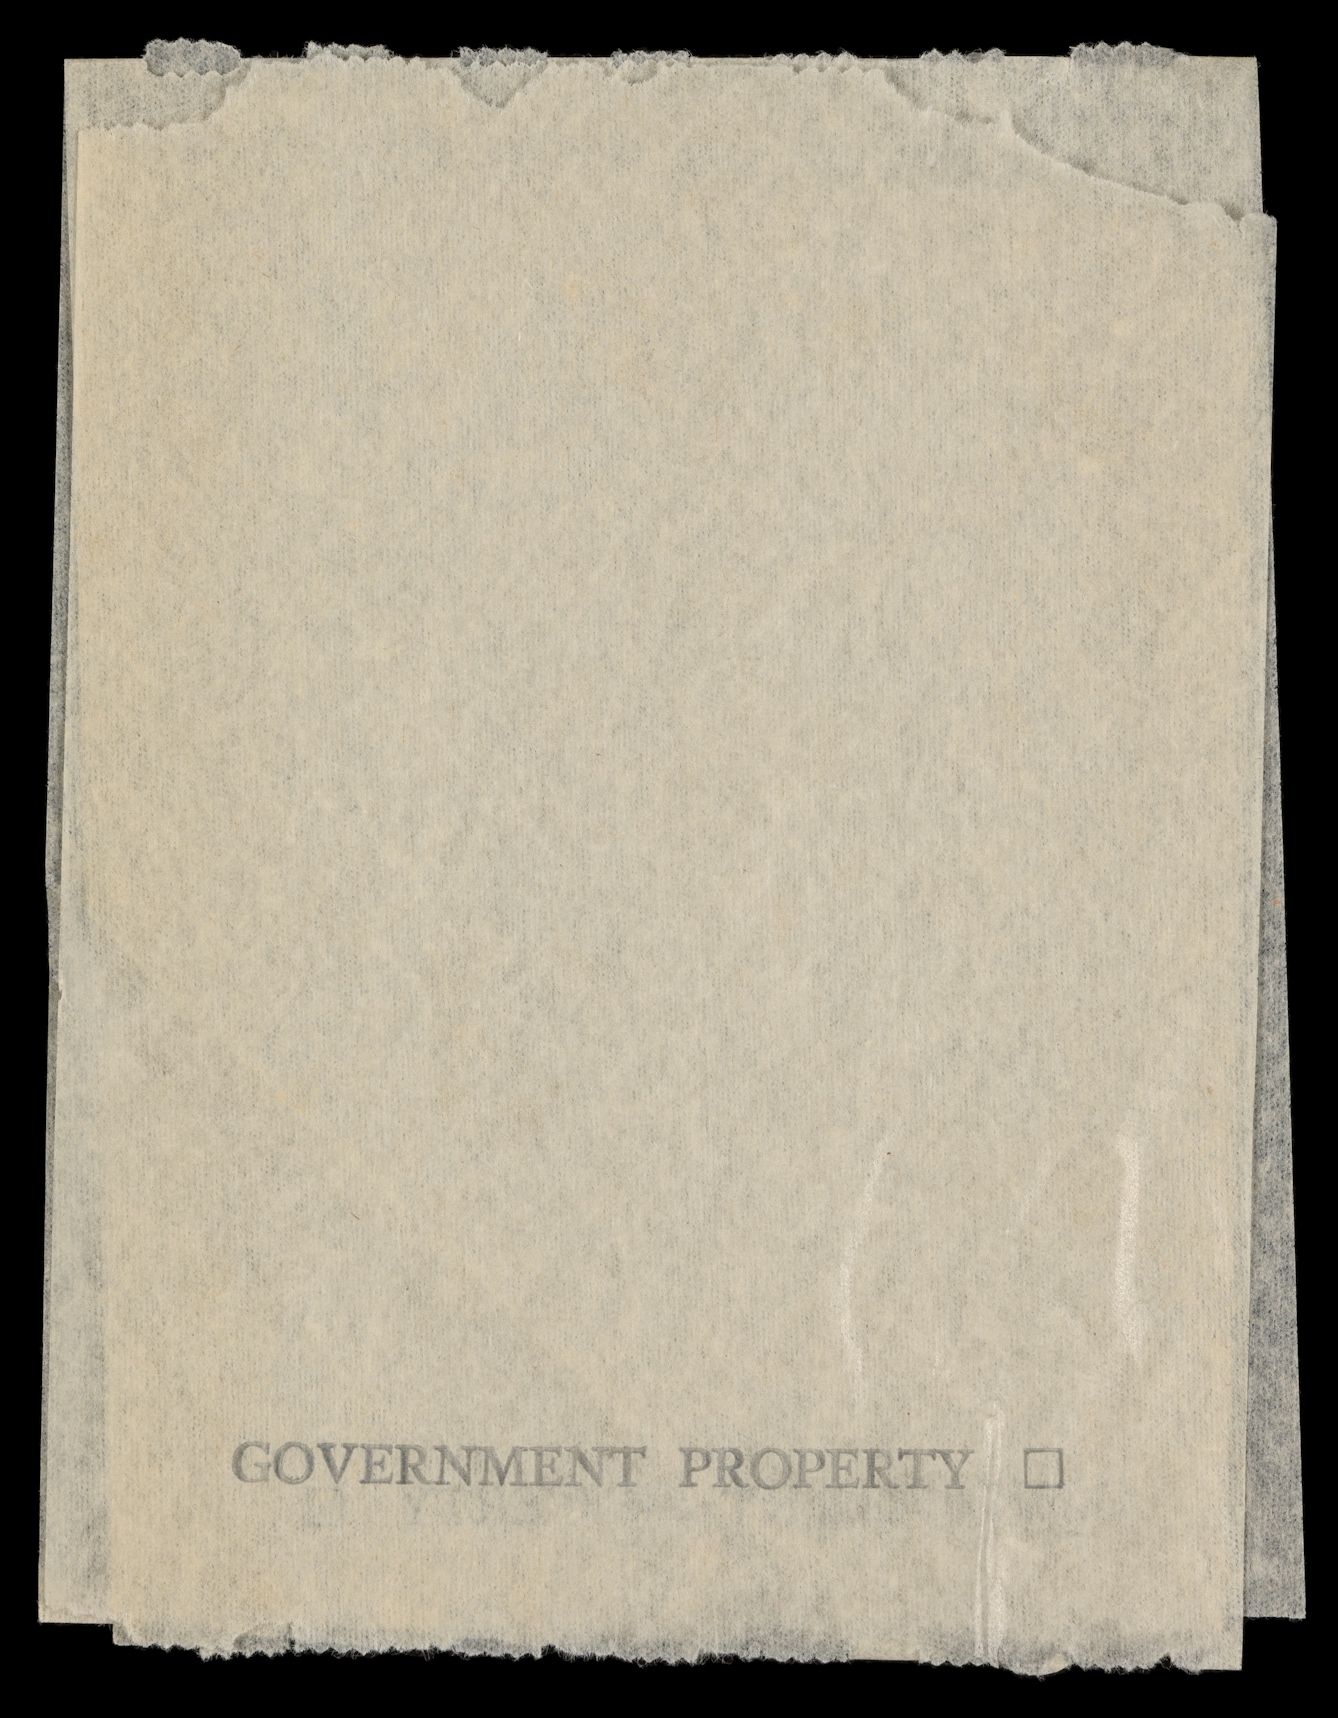 Photograph of a toilet paper sample sheet, bearing the stamp, "Government Property" across the bottom of the sheet.